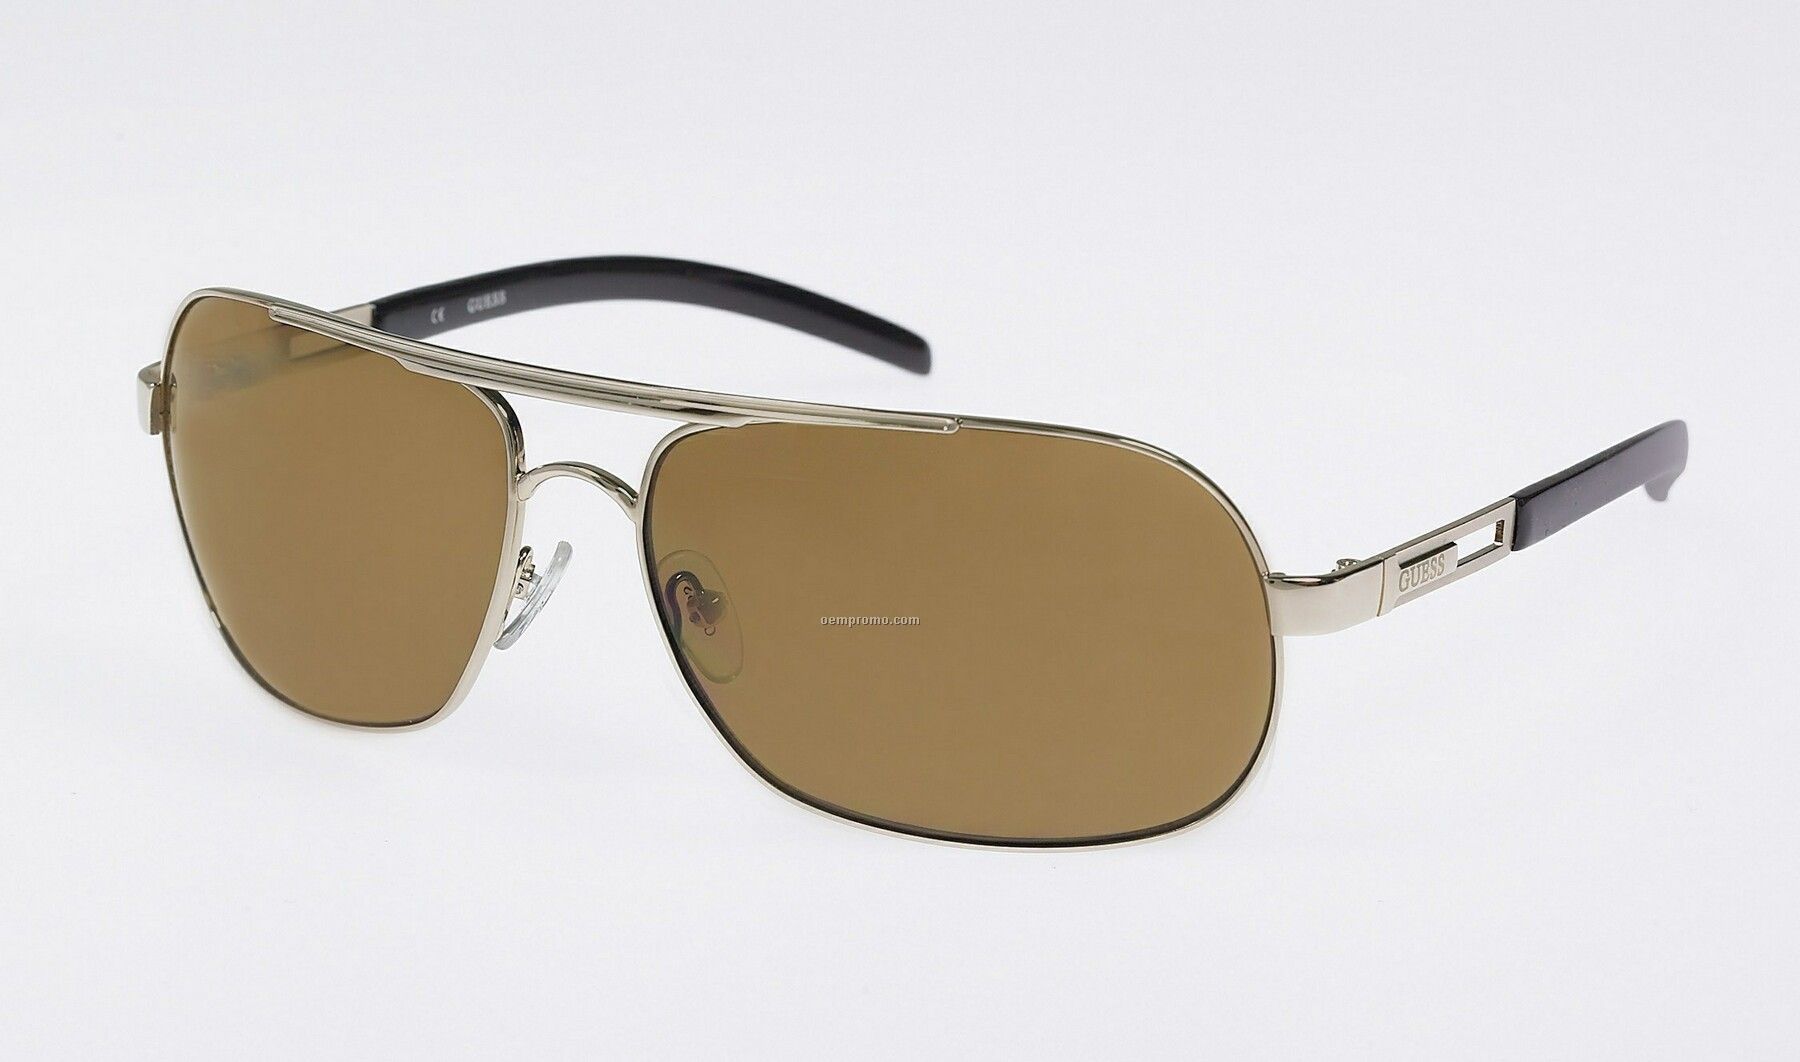 Gold Temple/Brown Lens Guess Sunglasses